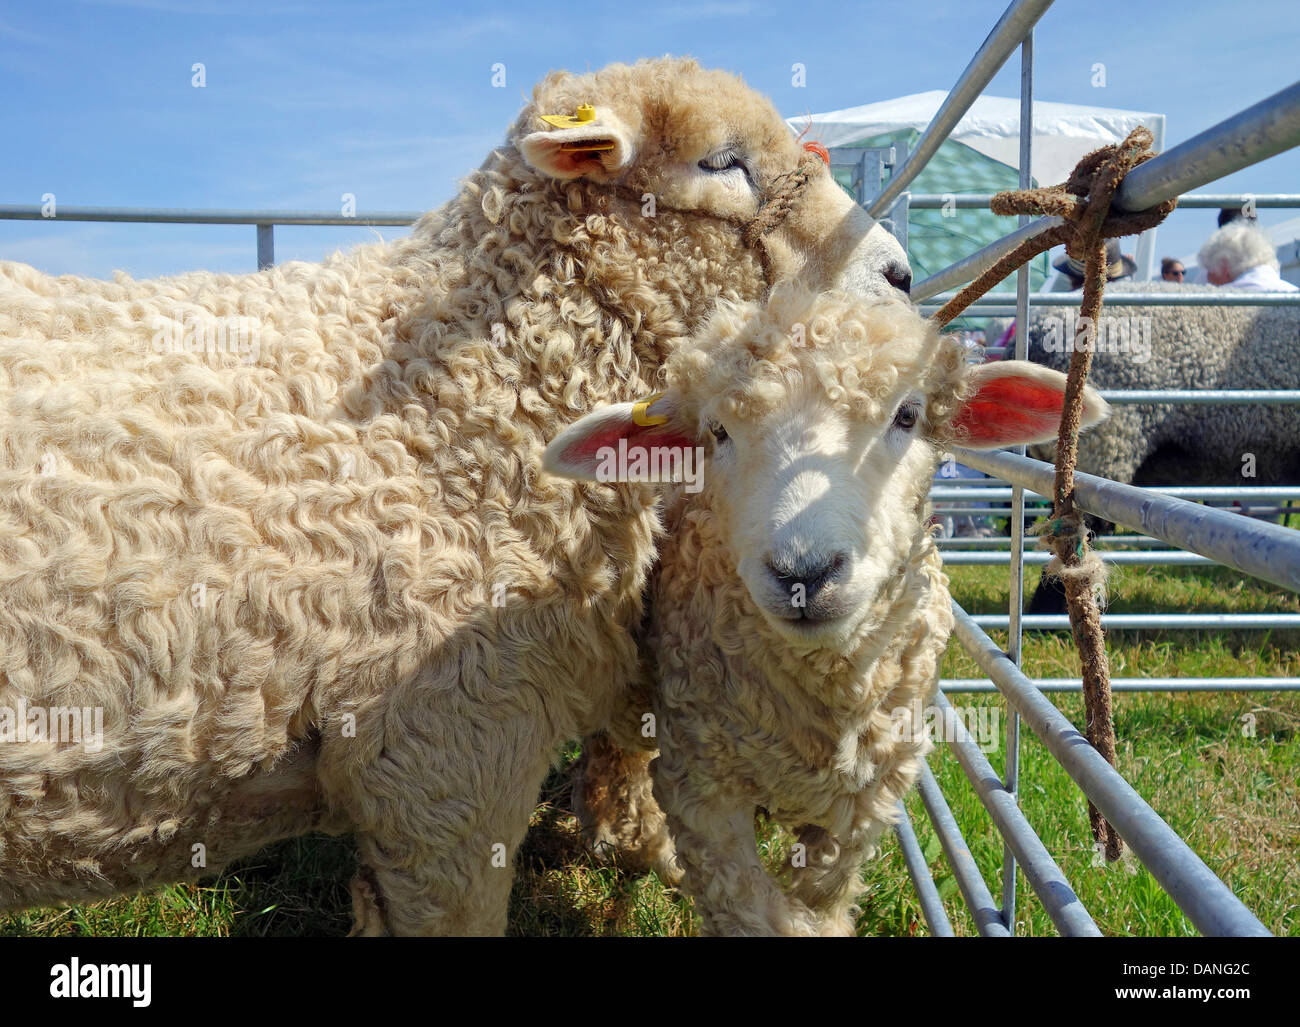 wooly sheep in a pen at a country fair in cornwall, uk Stock Photo